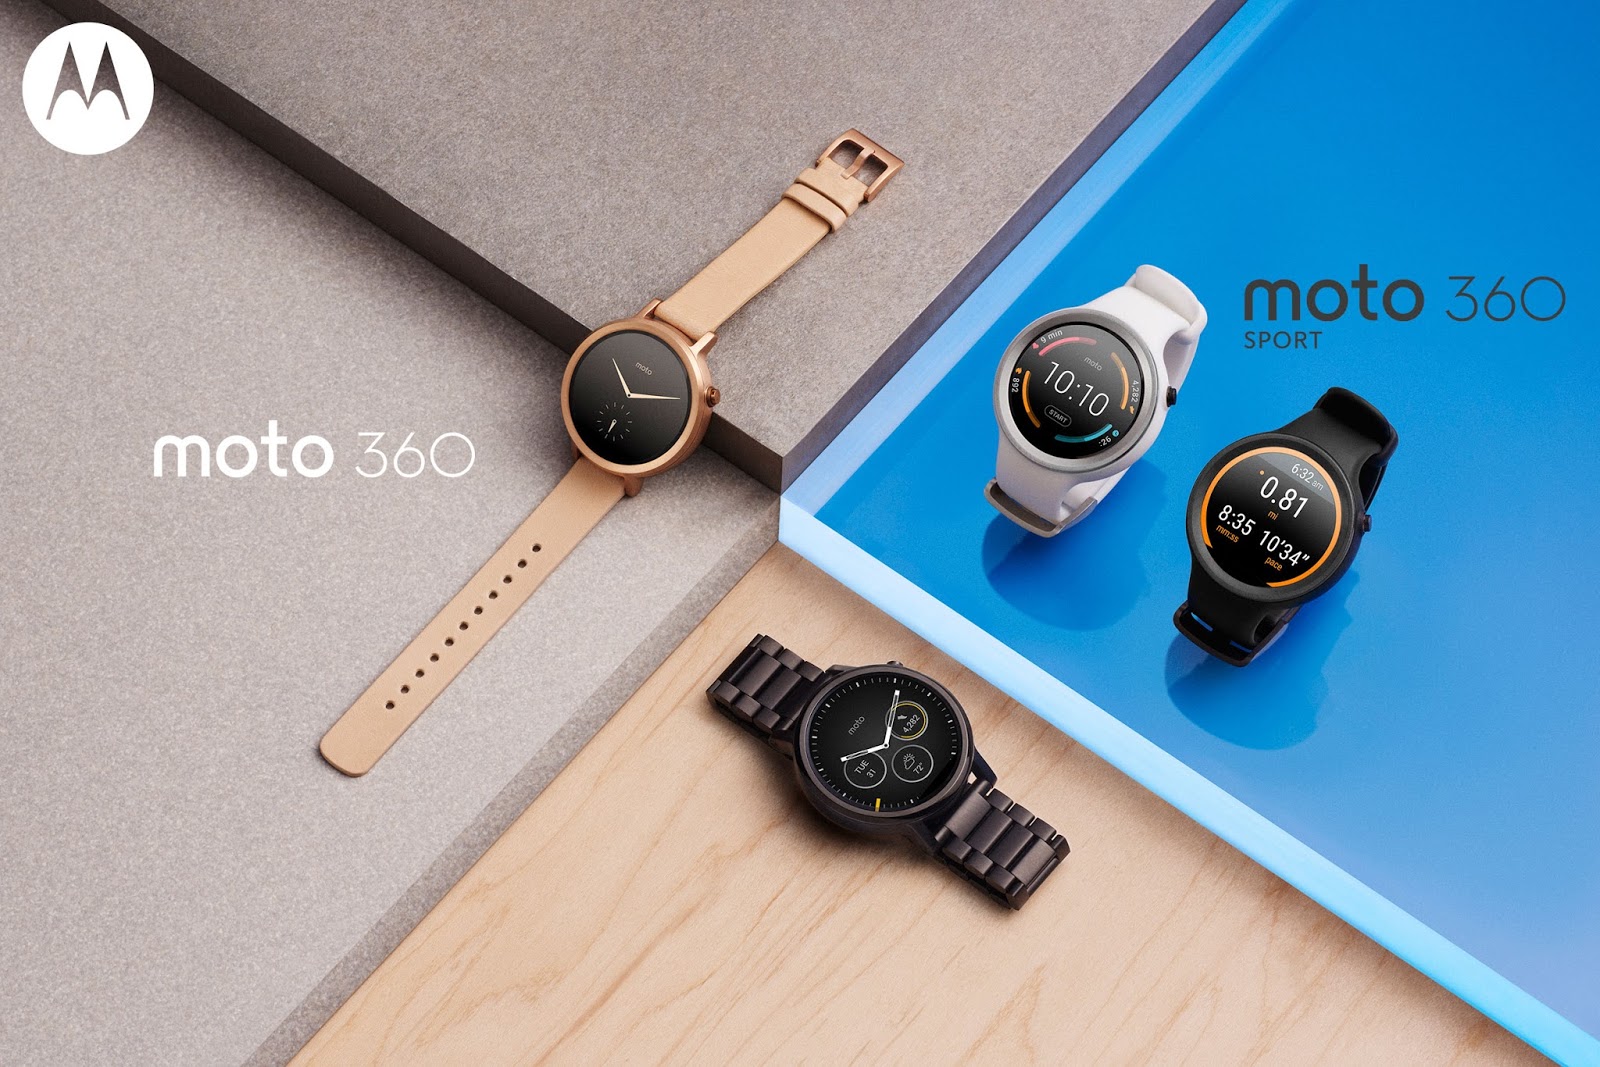 IFA 2015: New Moto 360 from Motorola announced with different sizes